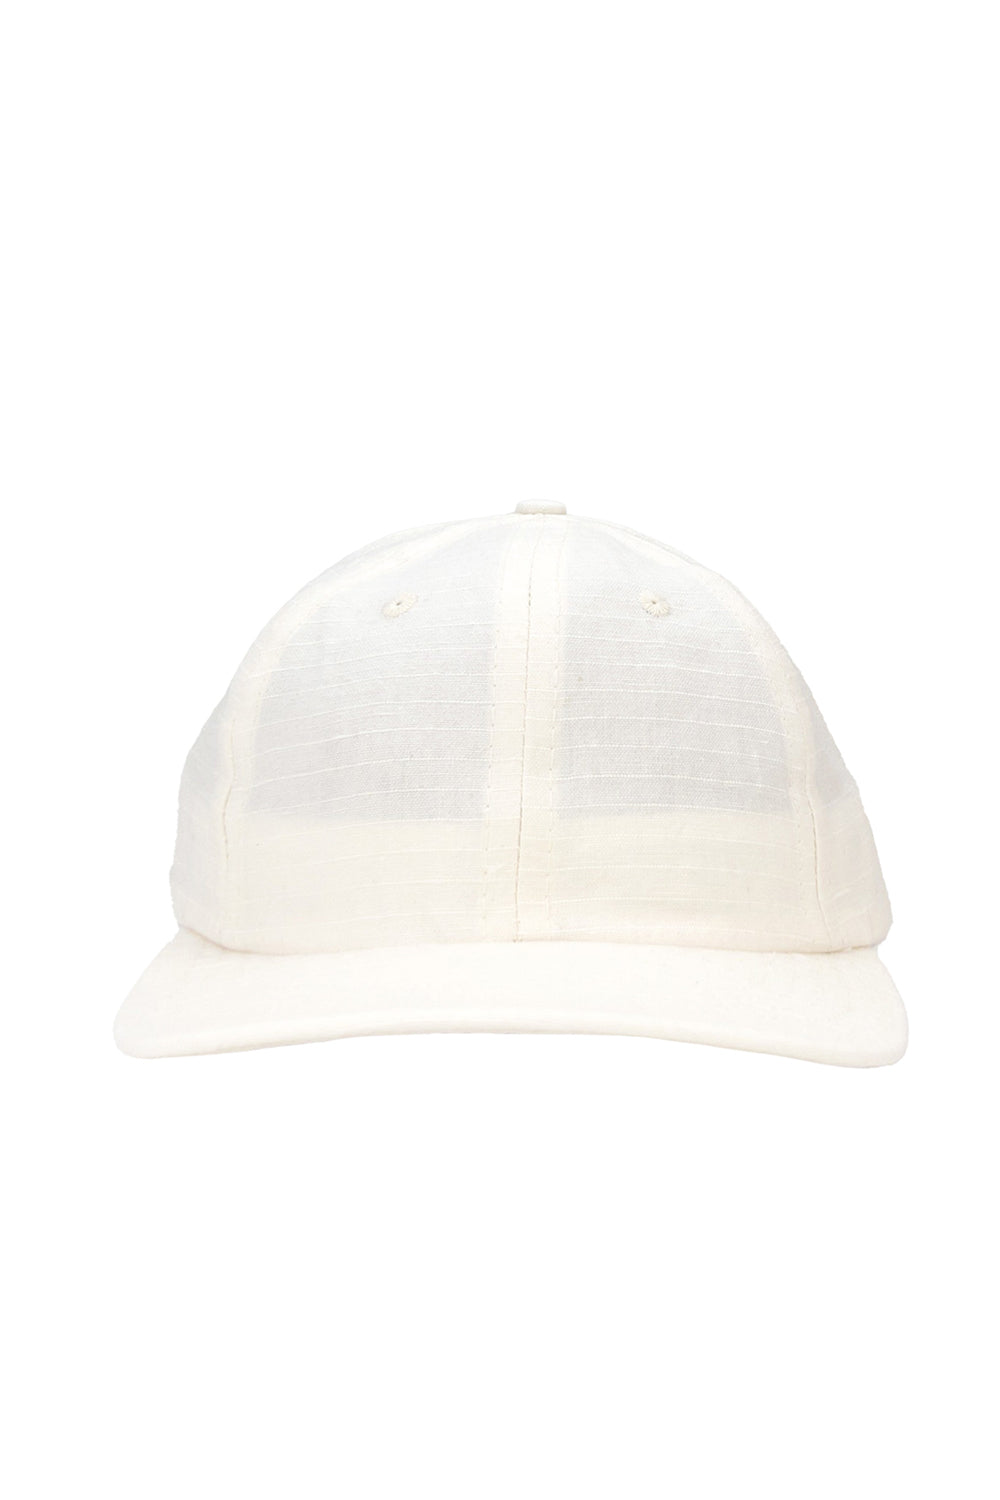 Chenga Ripstop Cap | Jungmaven Hemp Clothing & Accessories / Color: Washed White